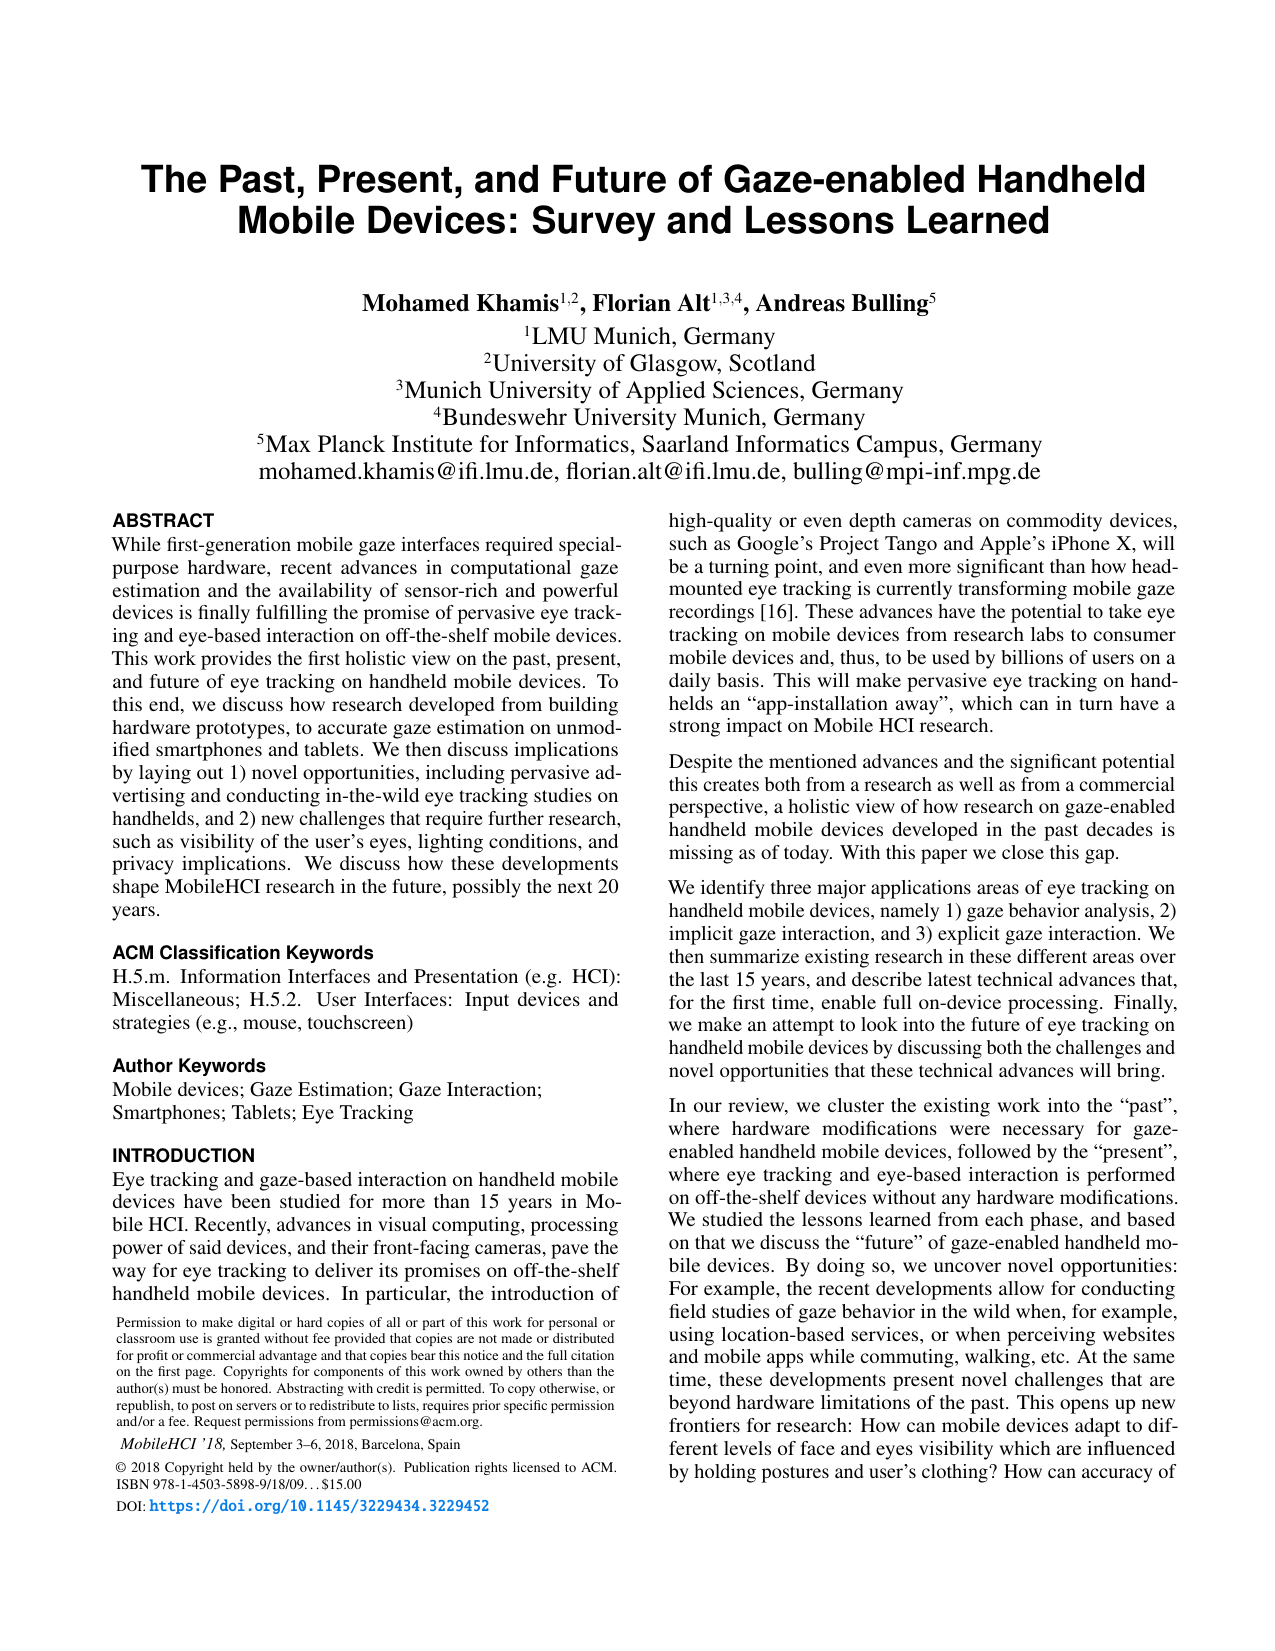 The Past, Present, and Future of Gaze-enabled Handheld Mobile Devices: Survey and Lessons Learned